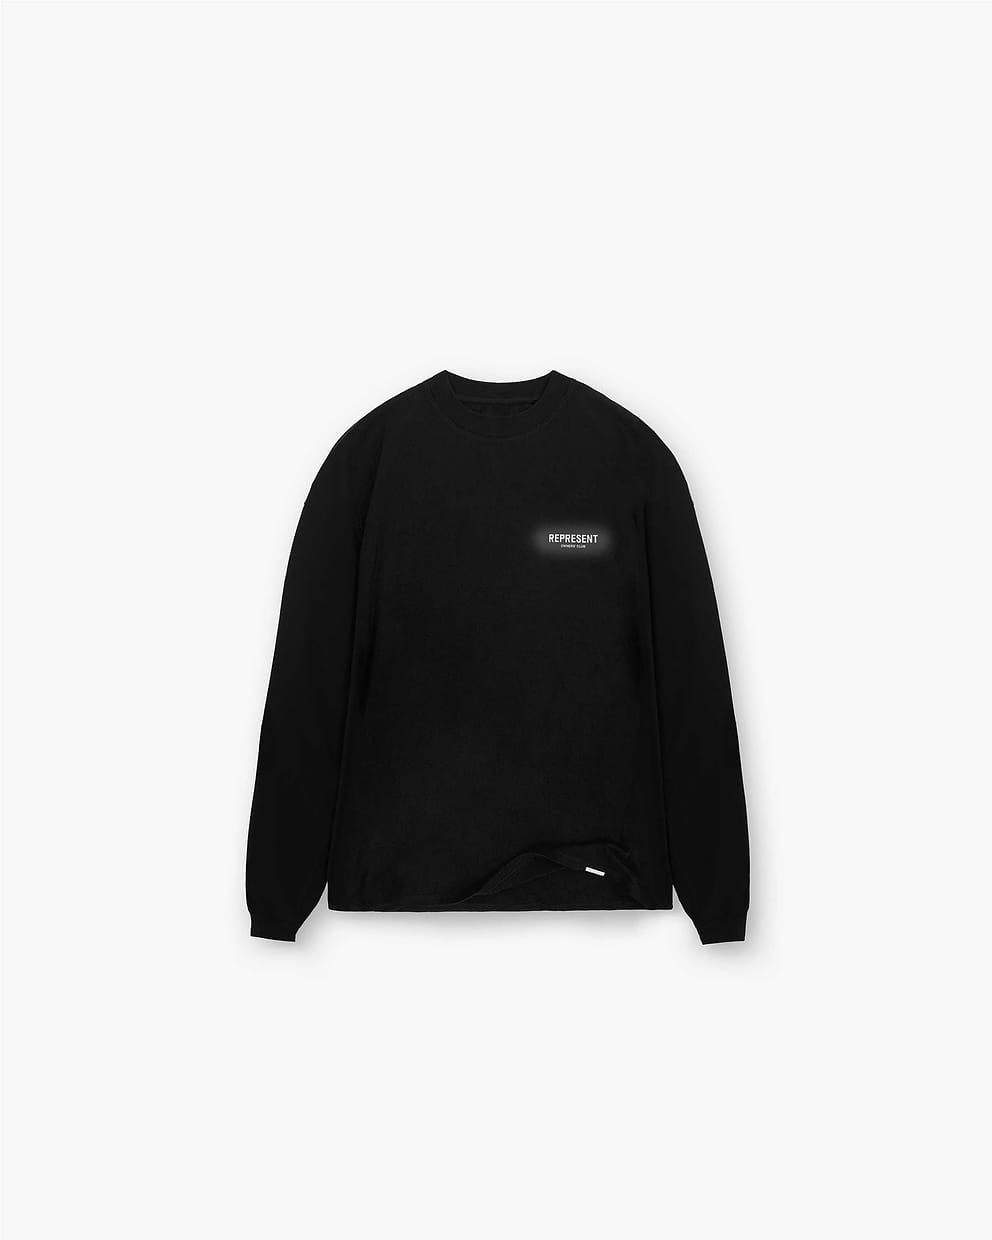 Represent Owners Club Long Sleeve T-Shirt - Black Reflective